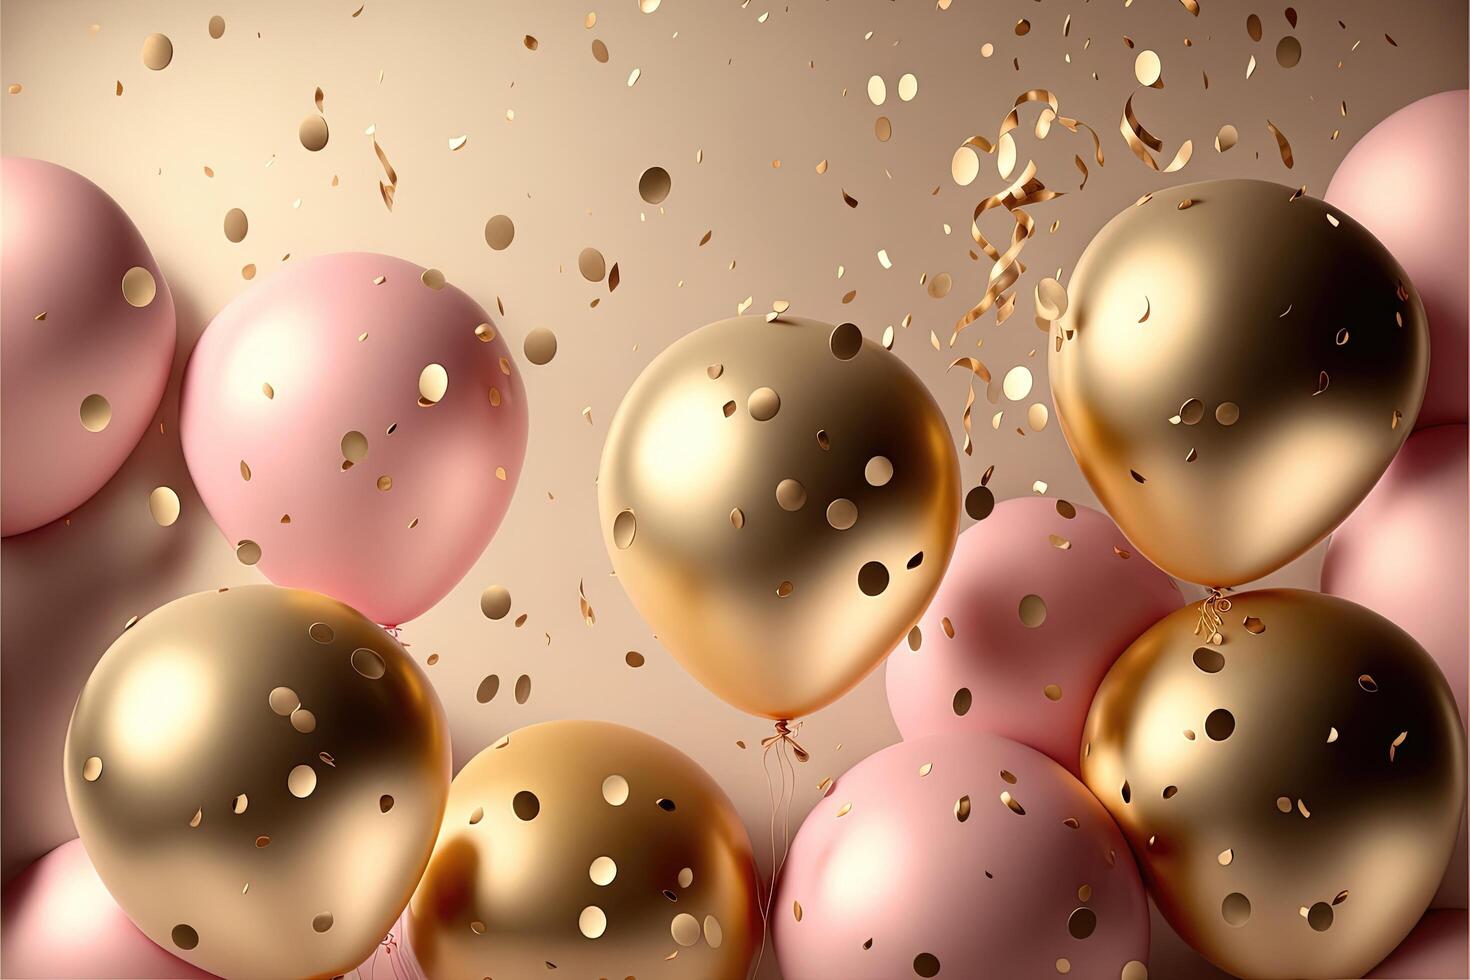 Holiday greeting background with pink and gold balloons blurred background and confetti. . photo